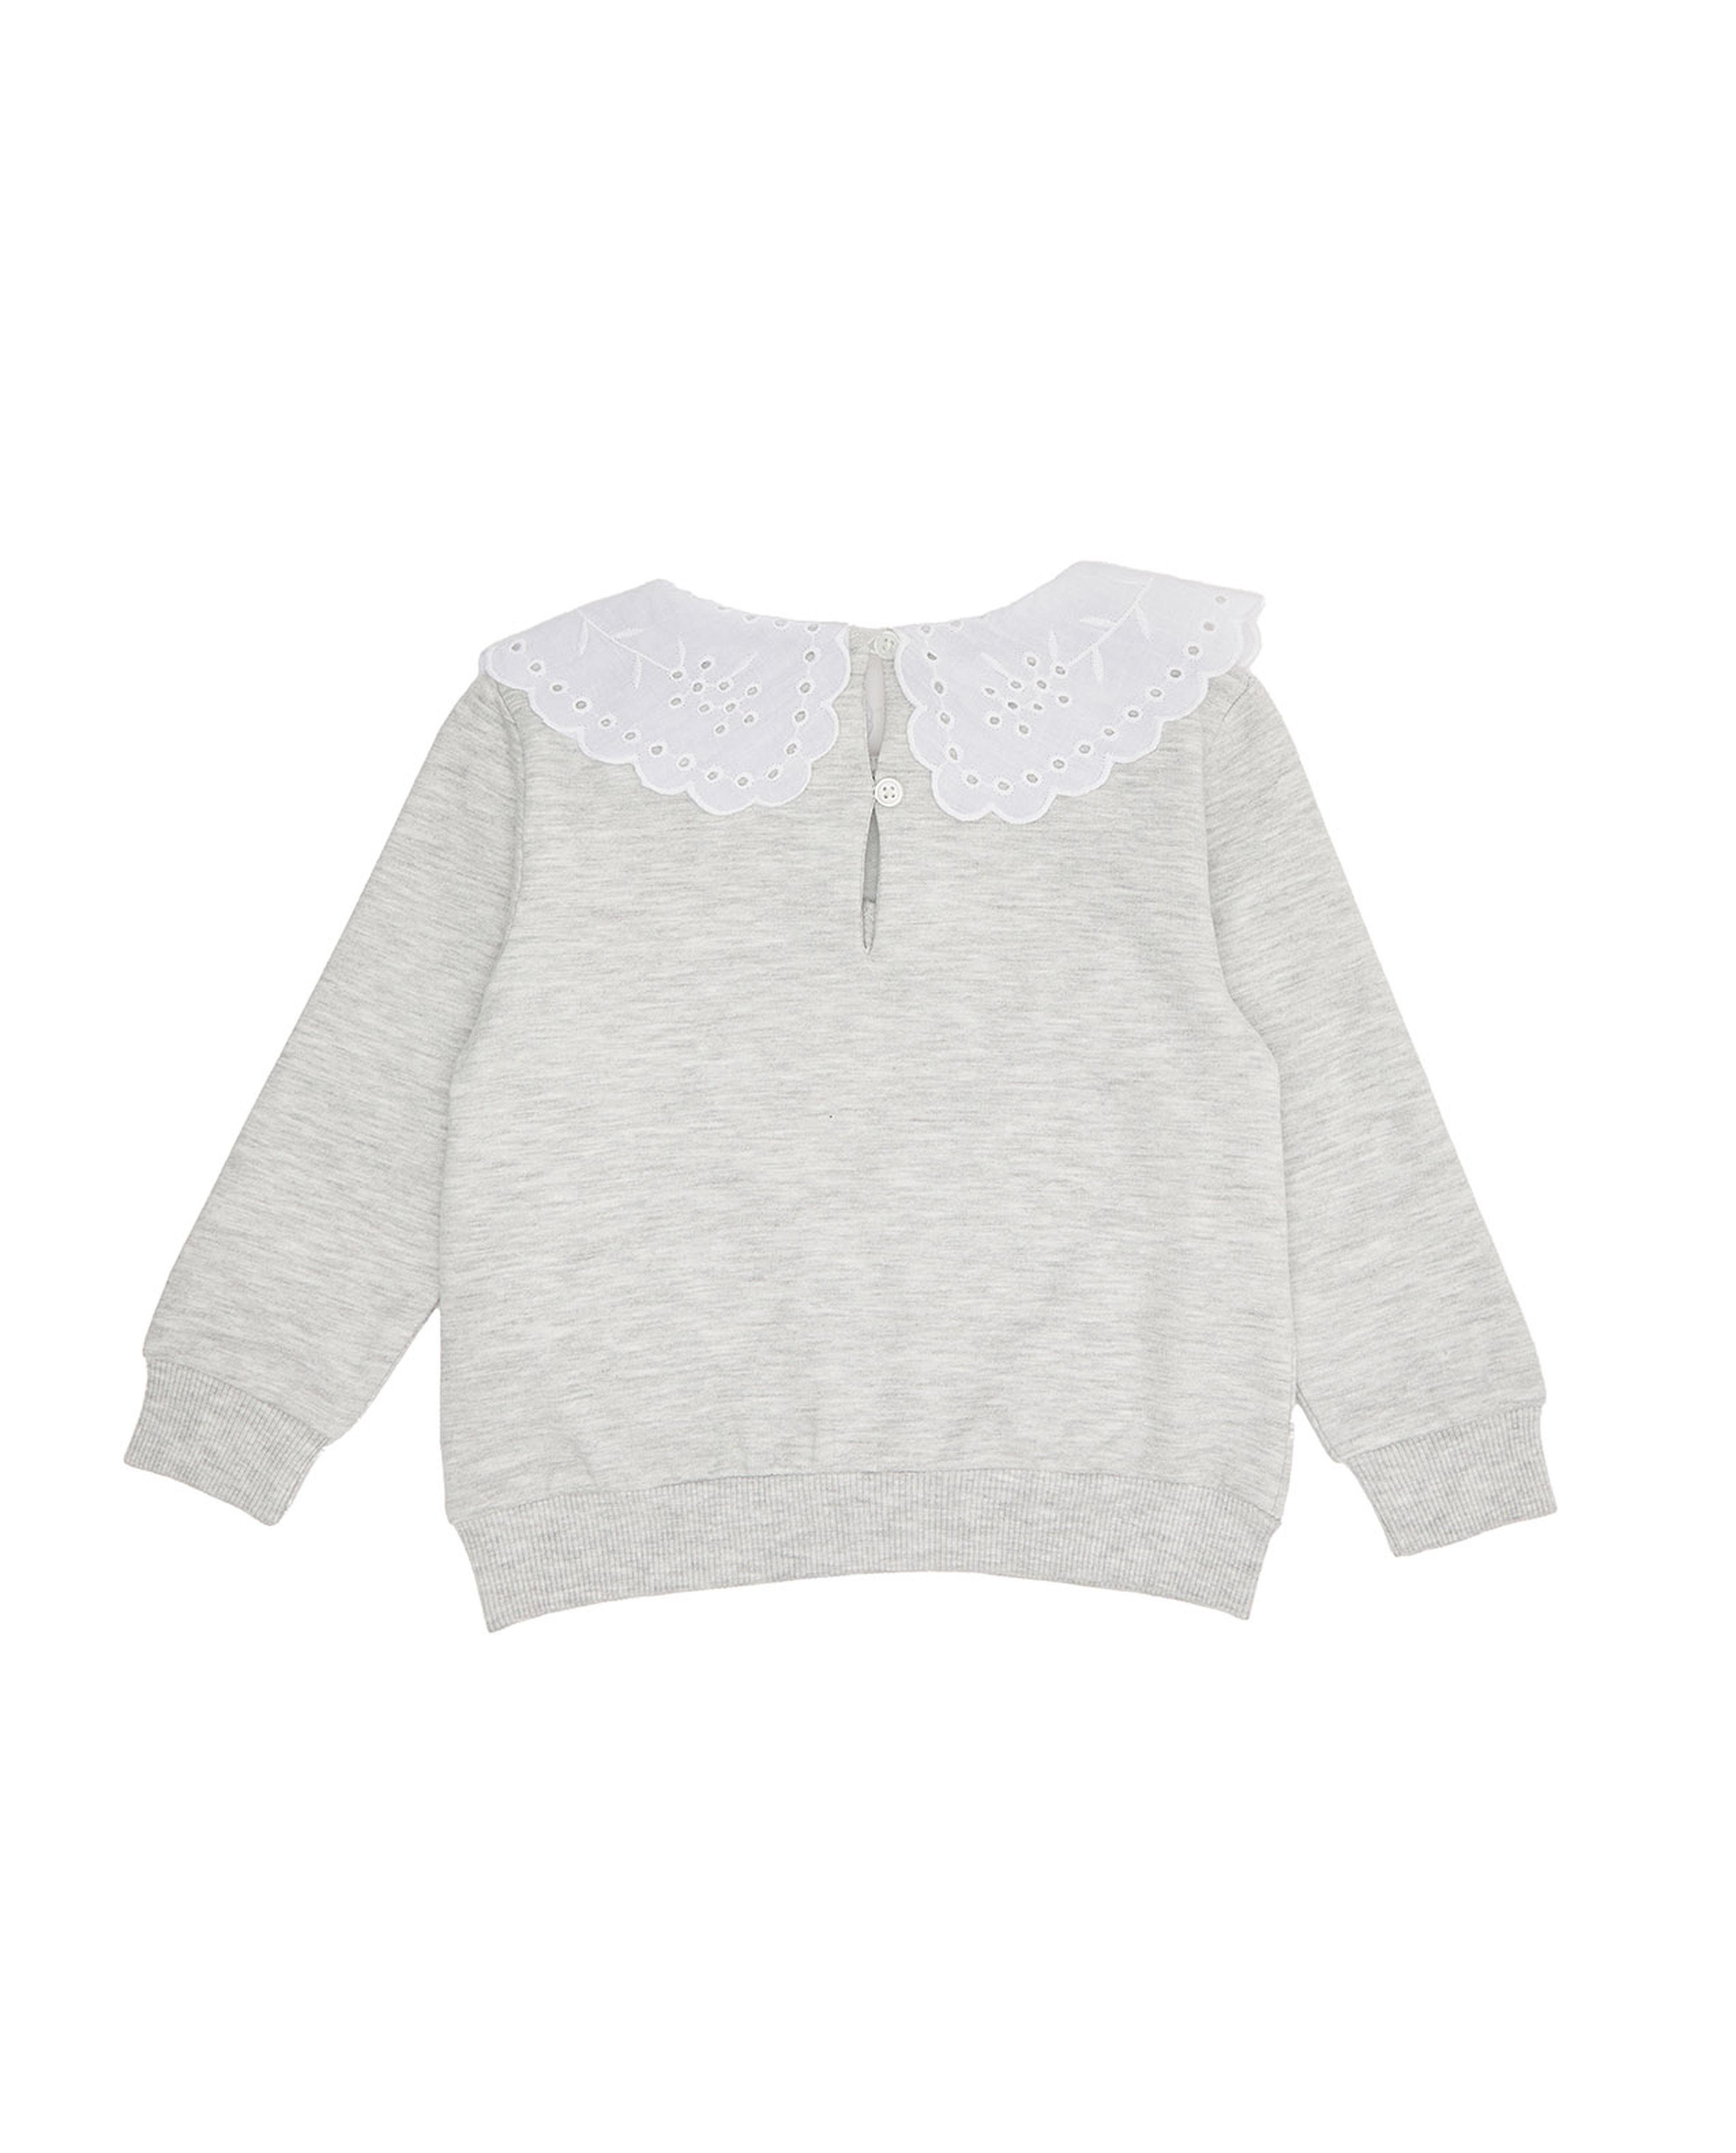 Sequined Sweatshirt with Peter Pan Collar and Long Sleeves